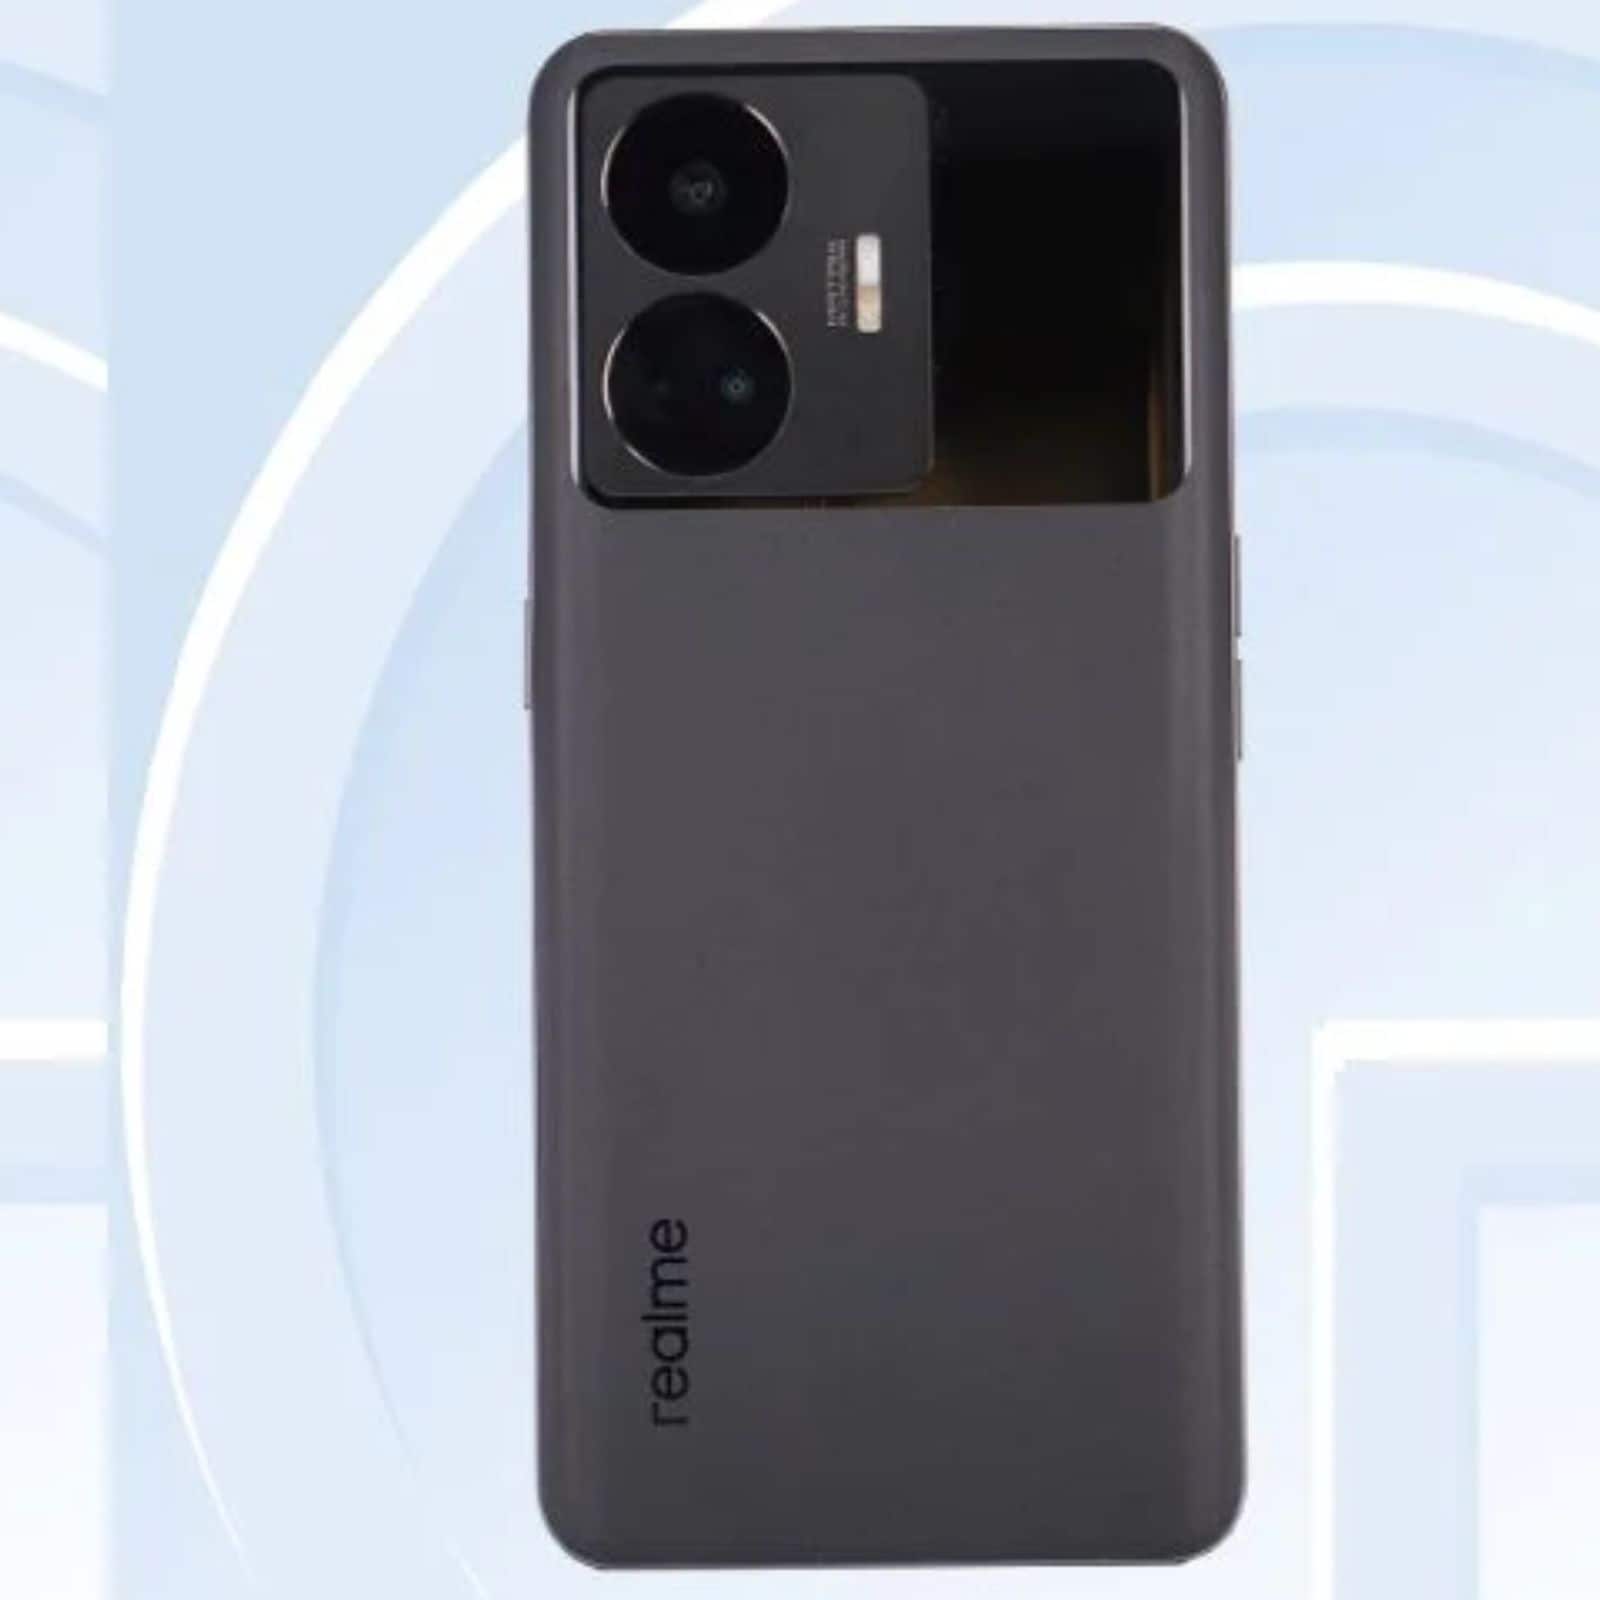 Realme GT 2 Series to launch globally at Mobile World Congress